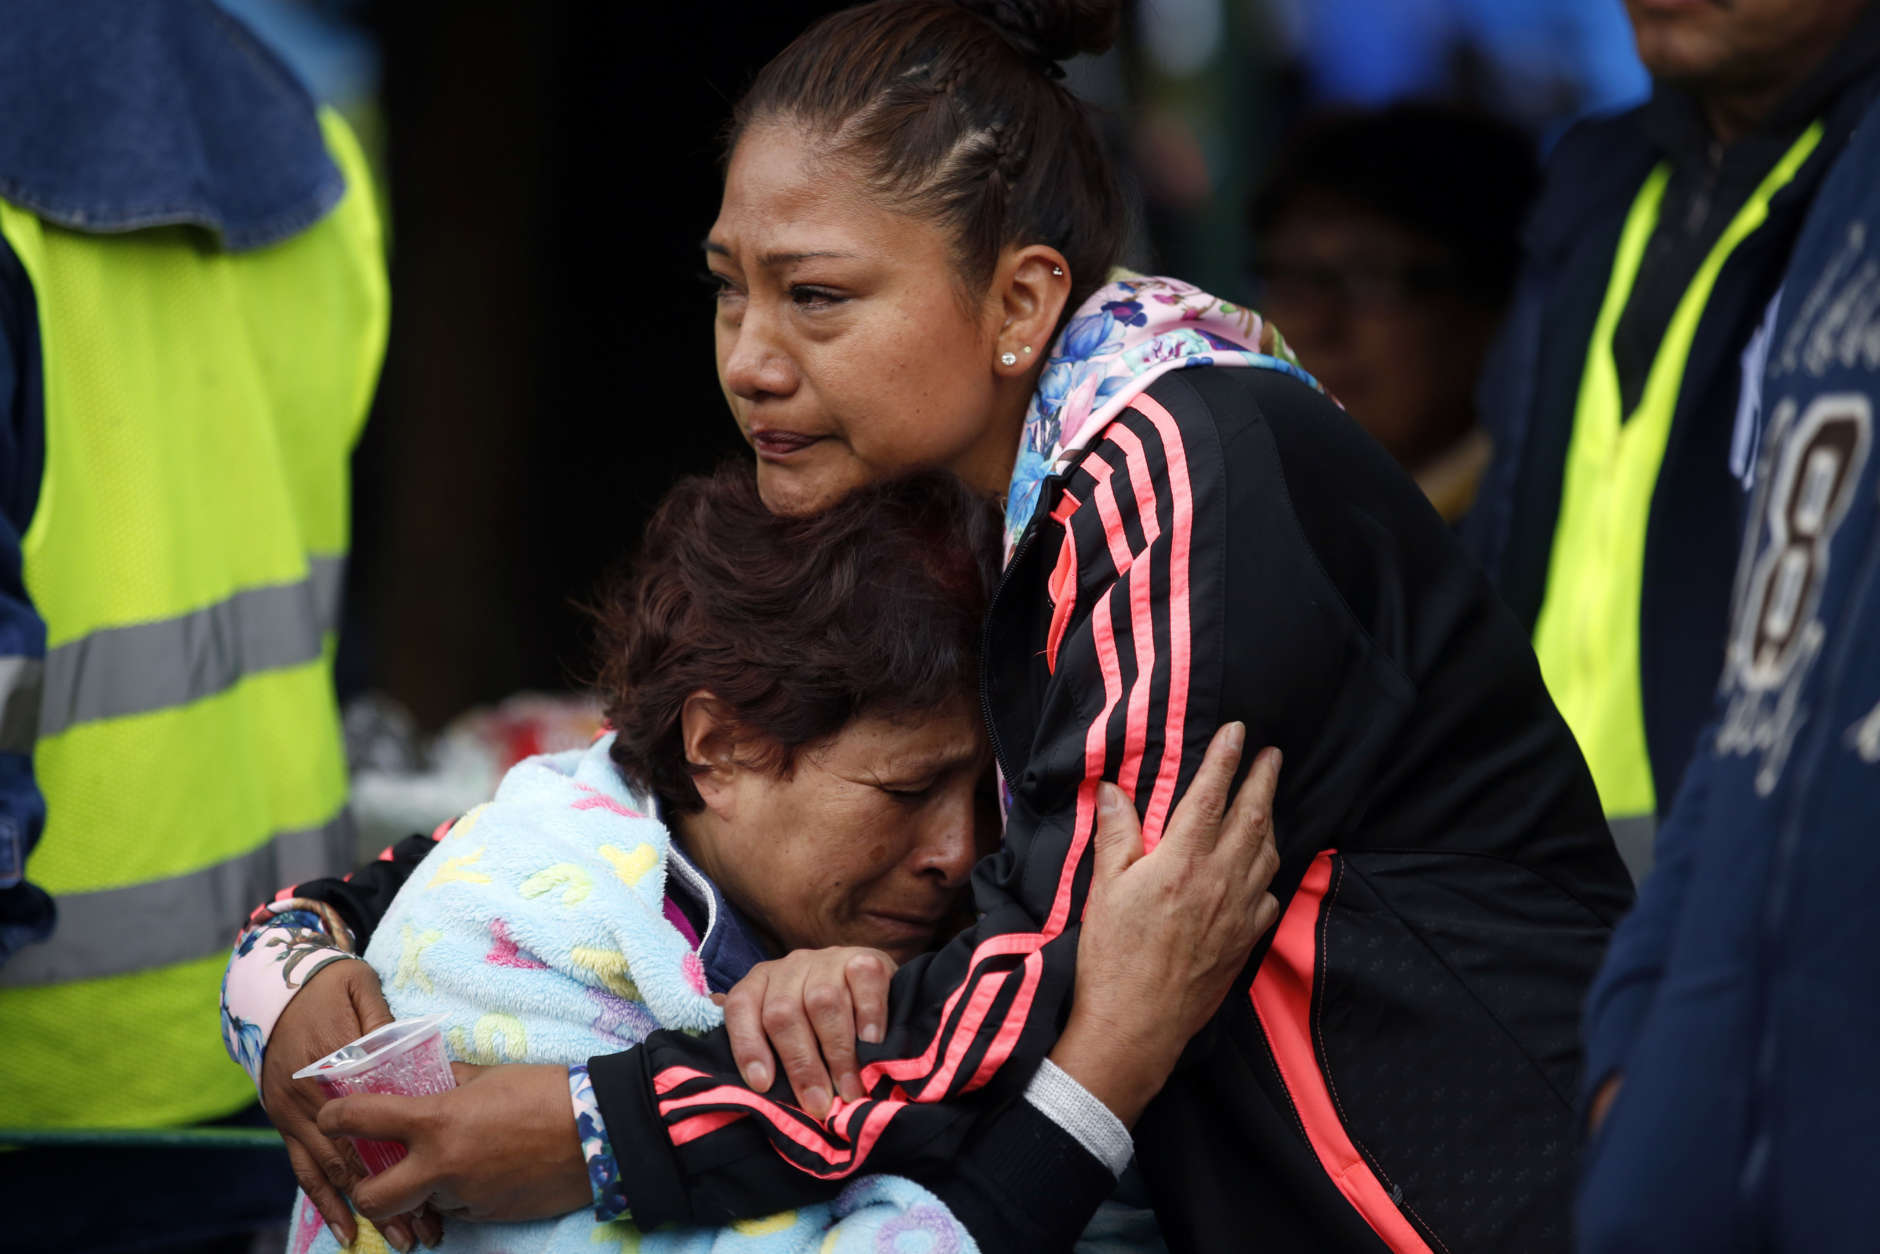 Family members embrace as they wait for news of their relatives outside a quake-collapsed seven-story building in Mexico City's Roma Norte neighborhood, Friday, Sept. 22, 2017. Mexican officials are promising to keep up the search for survivors as rescue operations stretch into a fourth day following Tuesday's major earthquake that devastated Mexico City and nearby states. (AP Photo/Rebecca Blackwell)